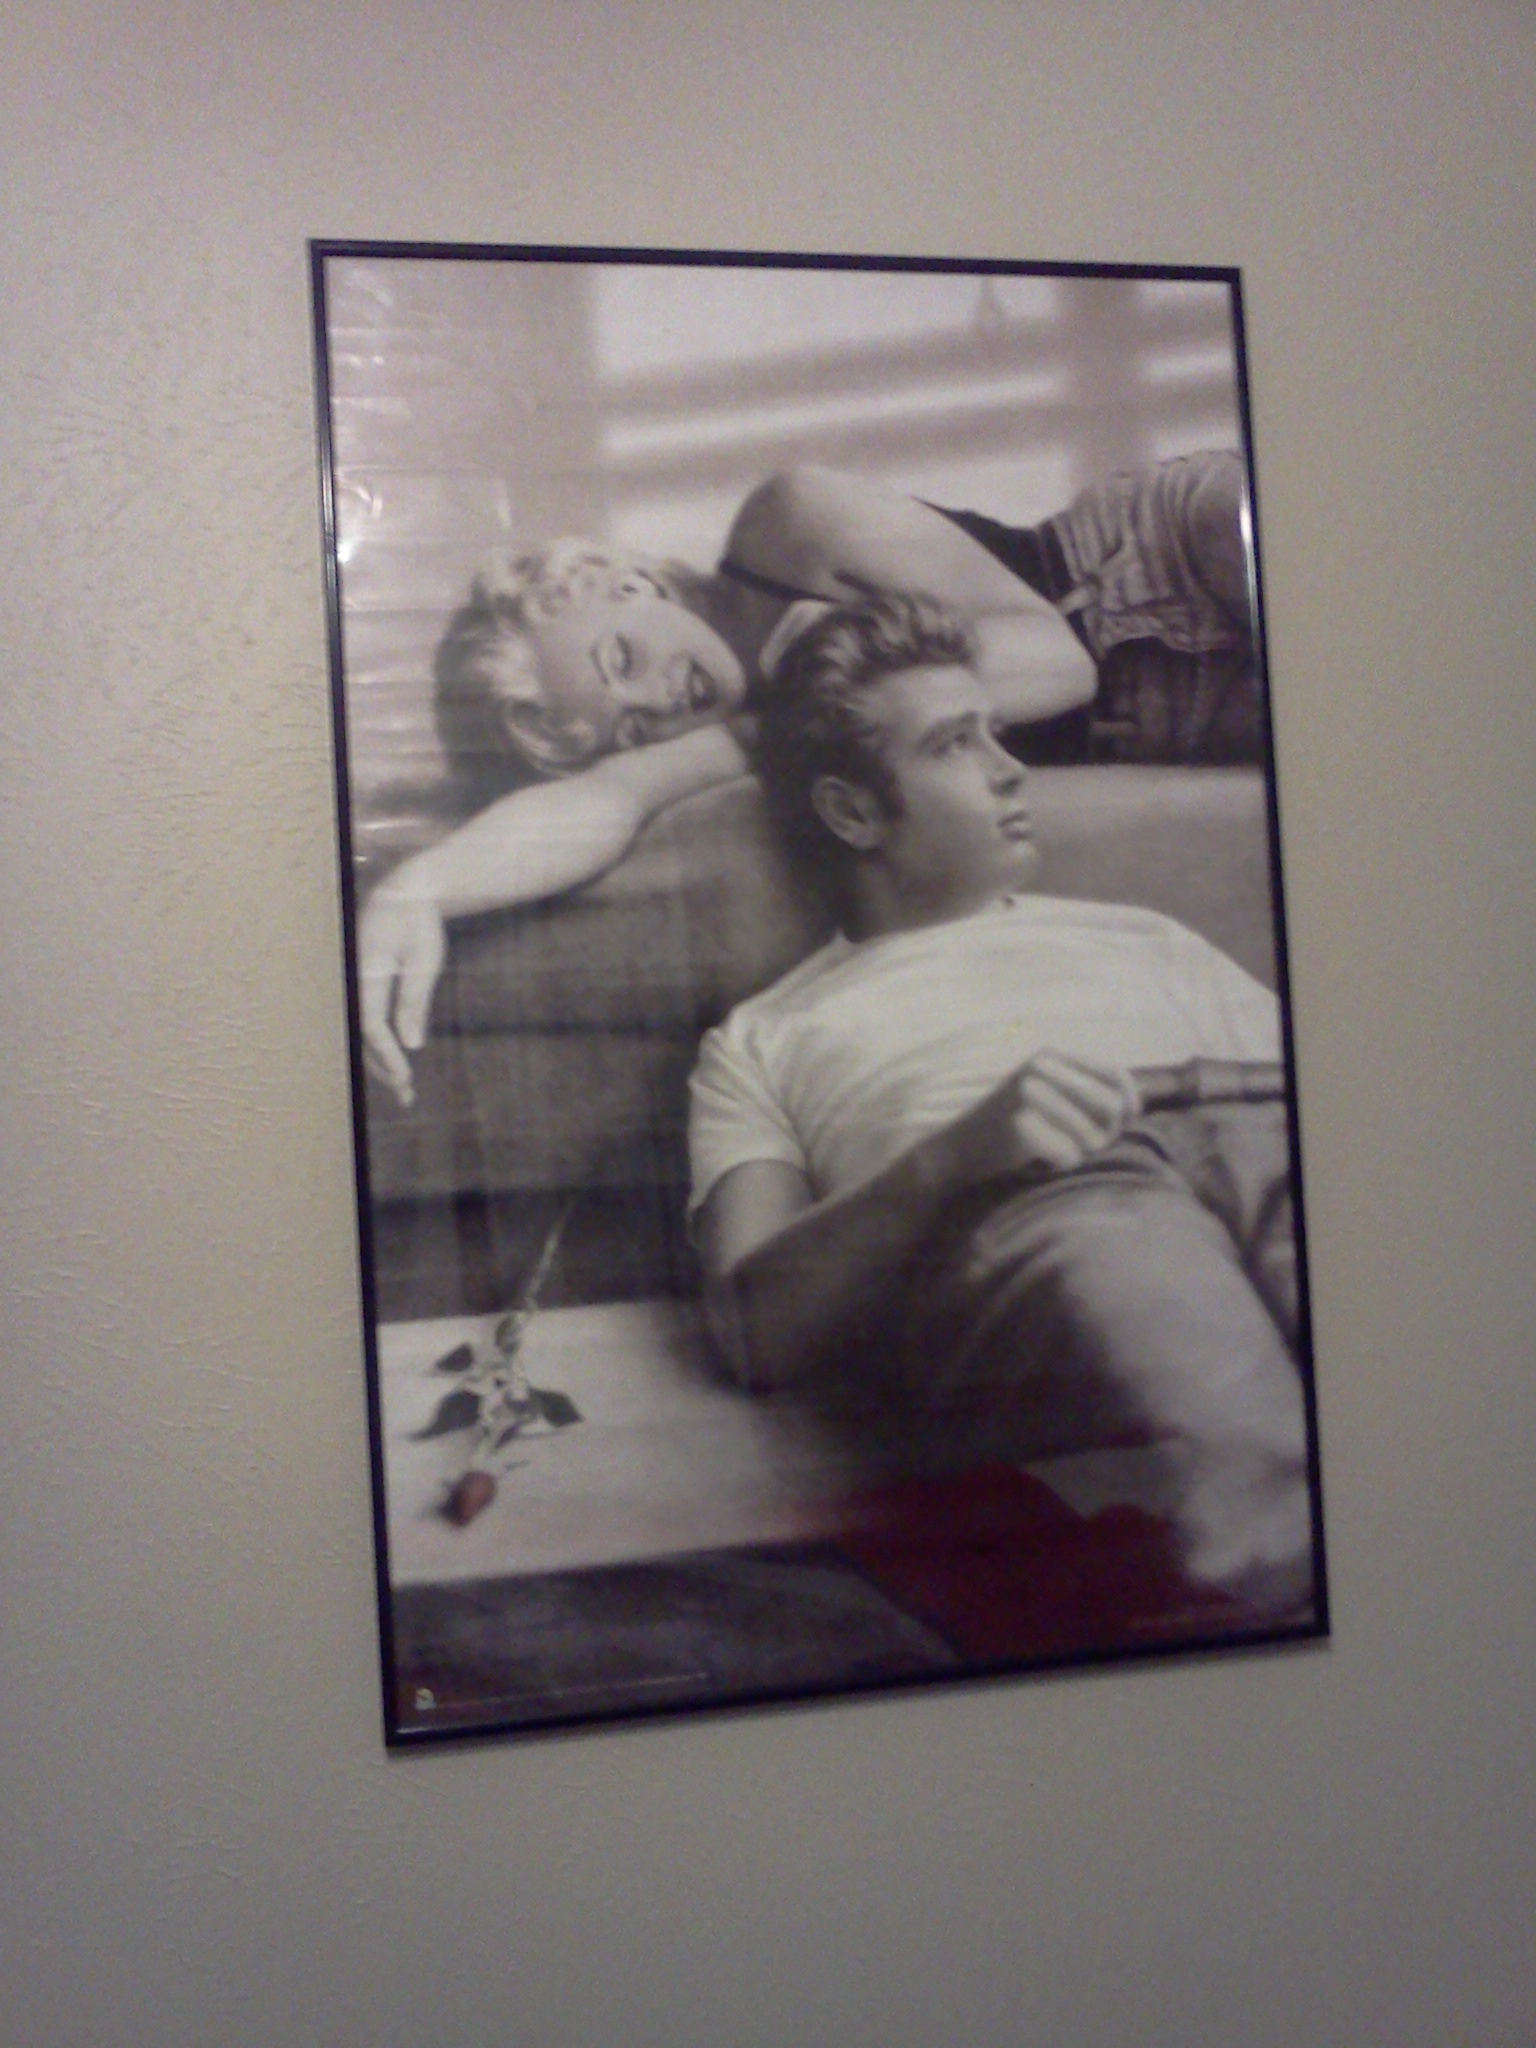 JAMES DEAN AND MARILYN MONROE POSTER